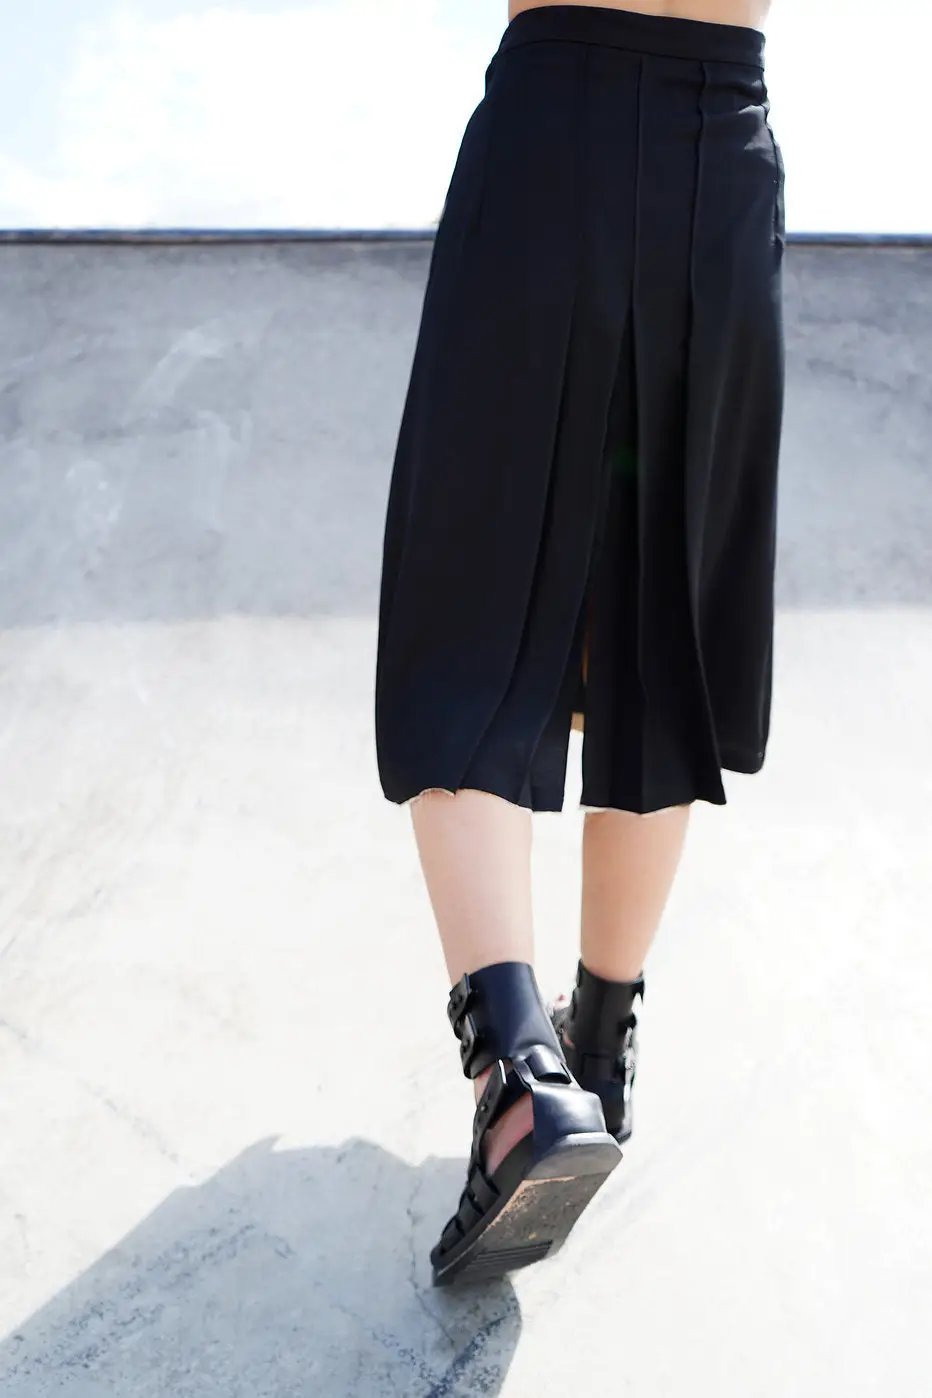 Chic black midi skirt with a unique blend of classic and contemporary style by Winnie Witt.